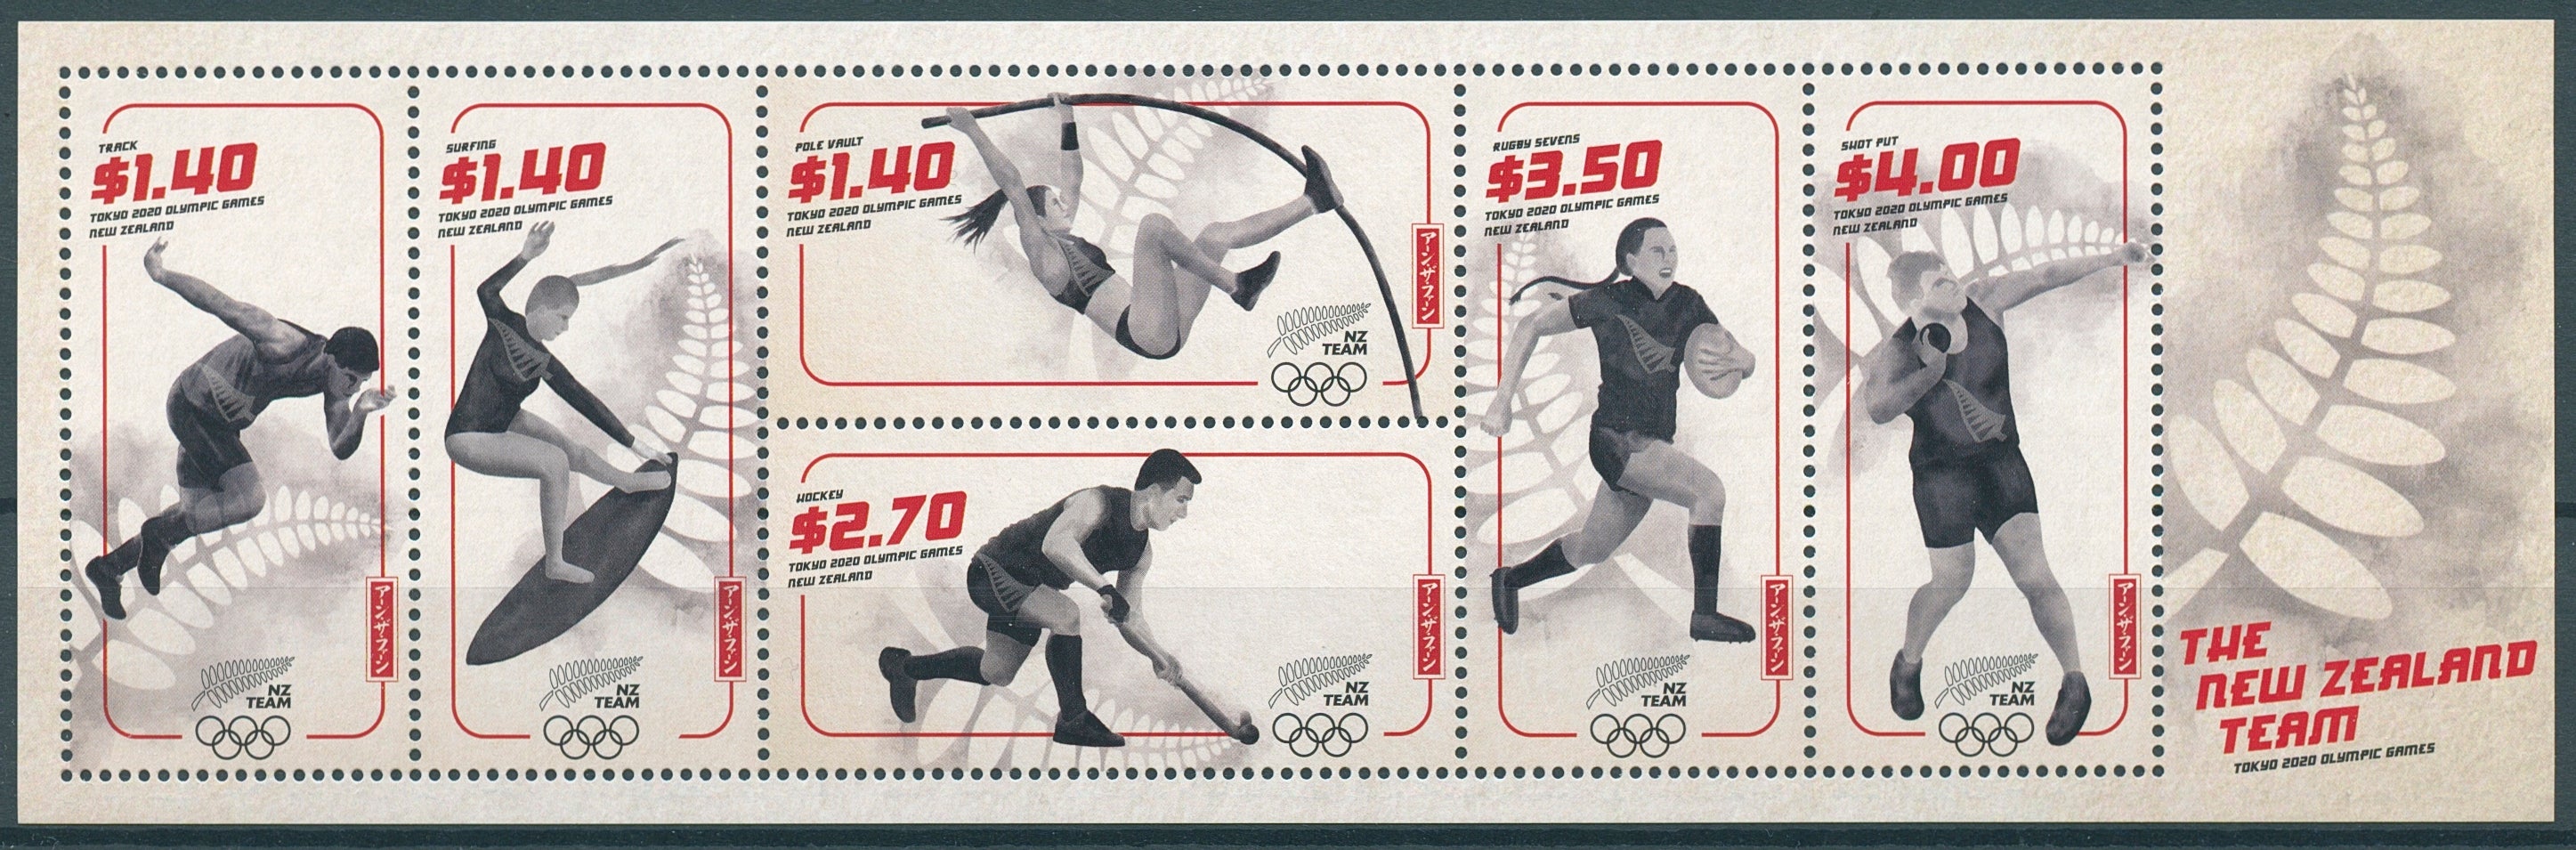 New Zealand NZ Olympics Stamps 2020 MNH Tokyo 2020 Hockey Rugby Sports 6v M/S